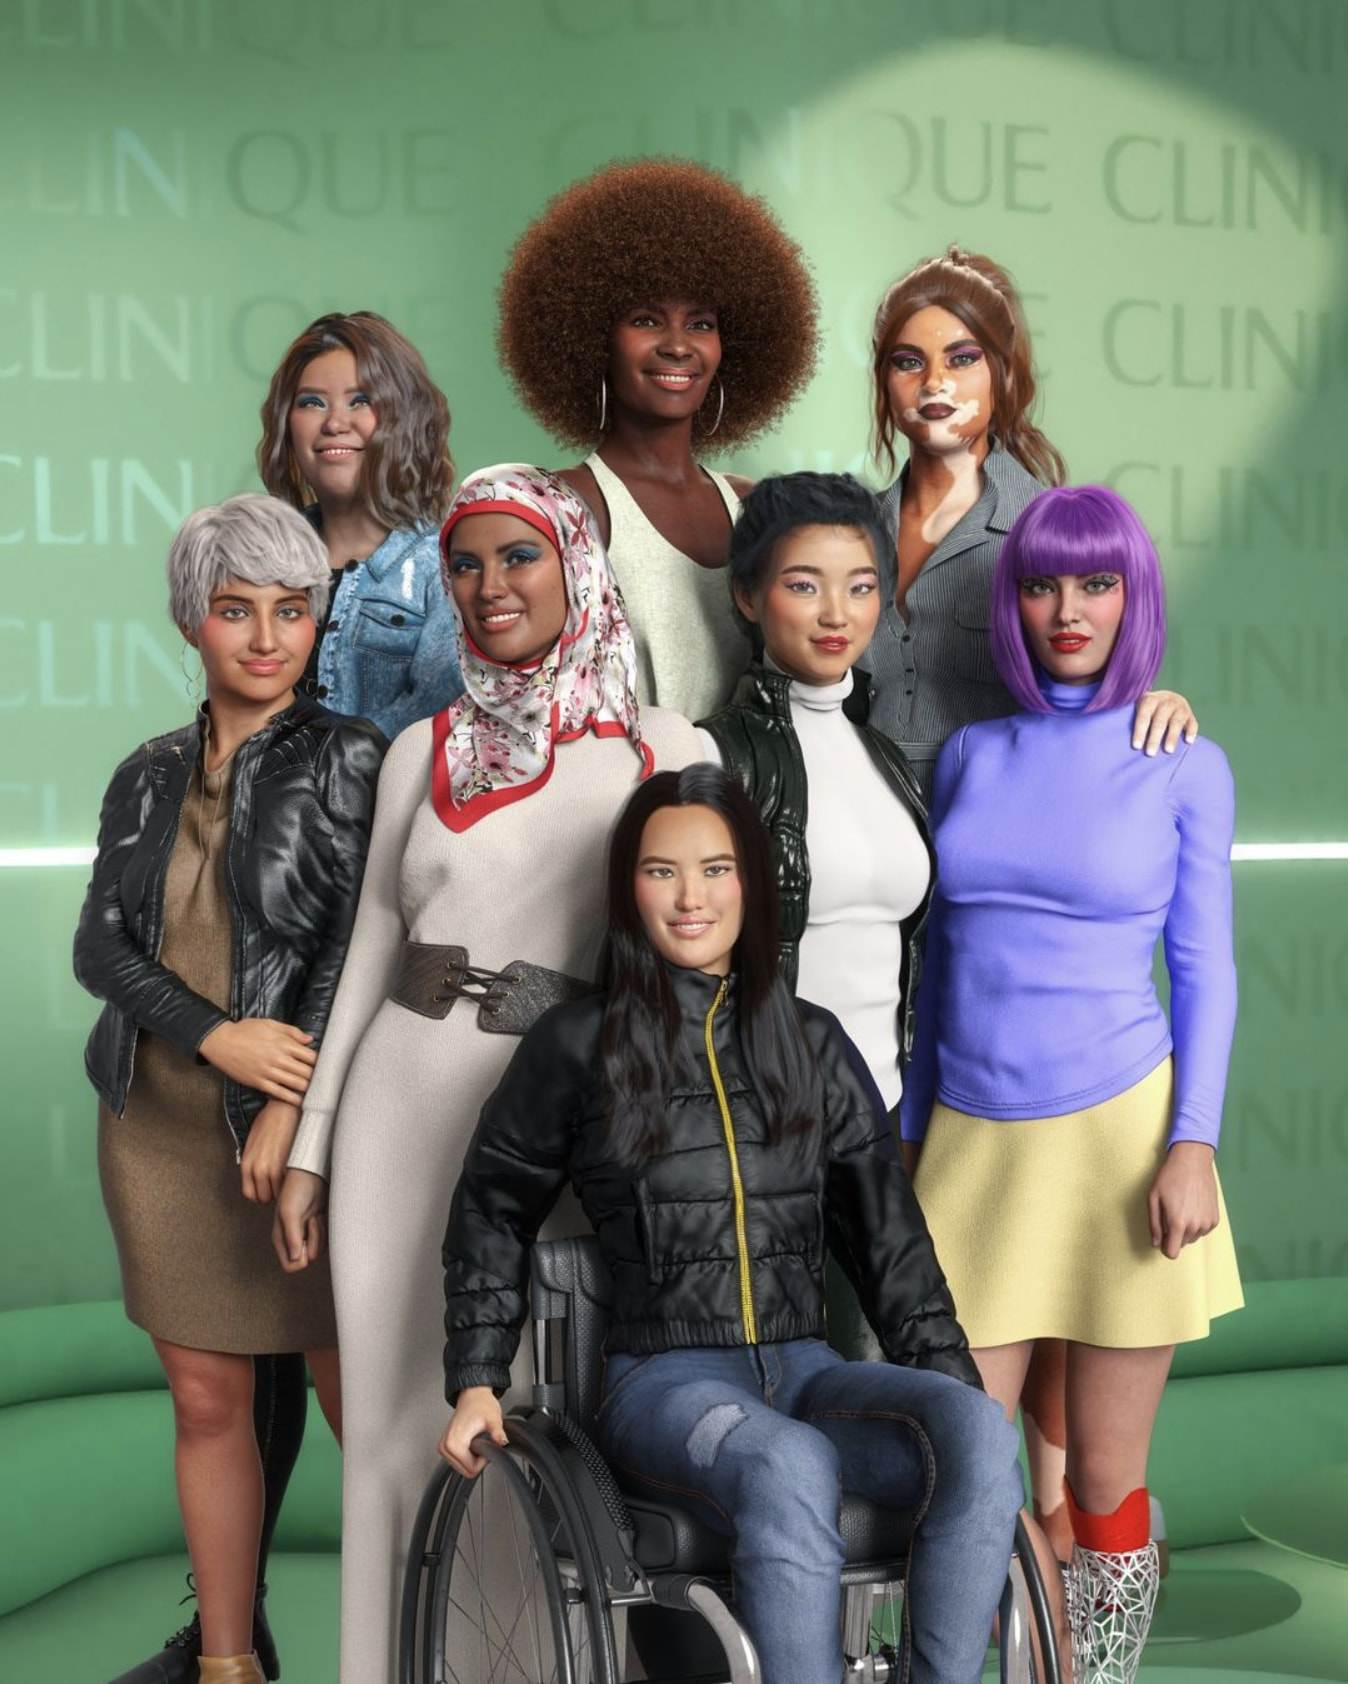 Some of the avatars of the Clinique  #MetaverseLikeUs campaign featuring #NFT makeup looks